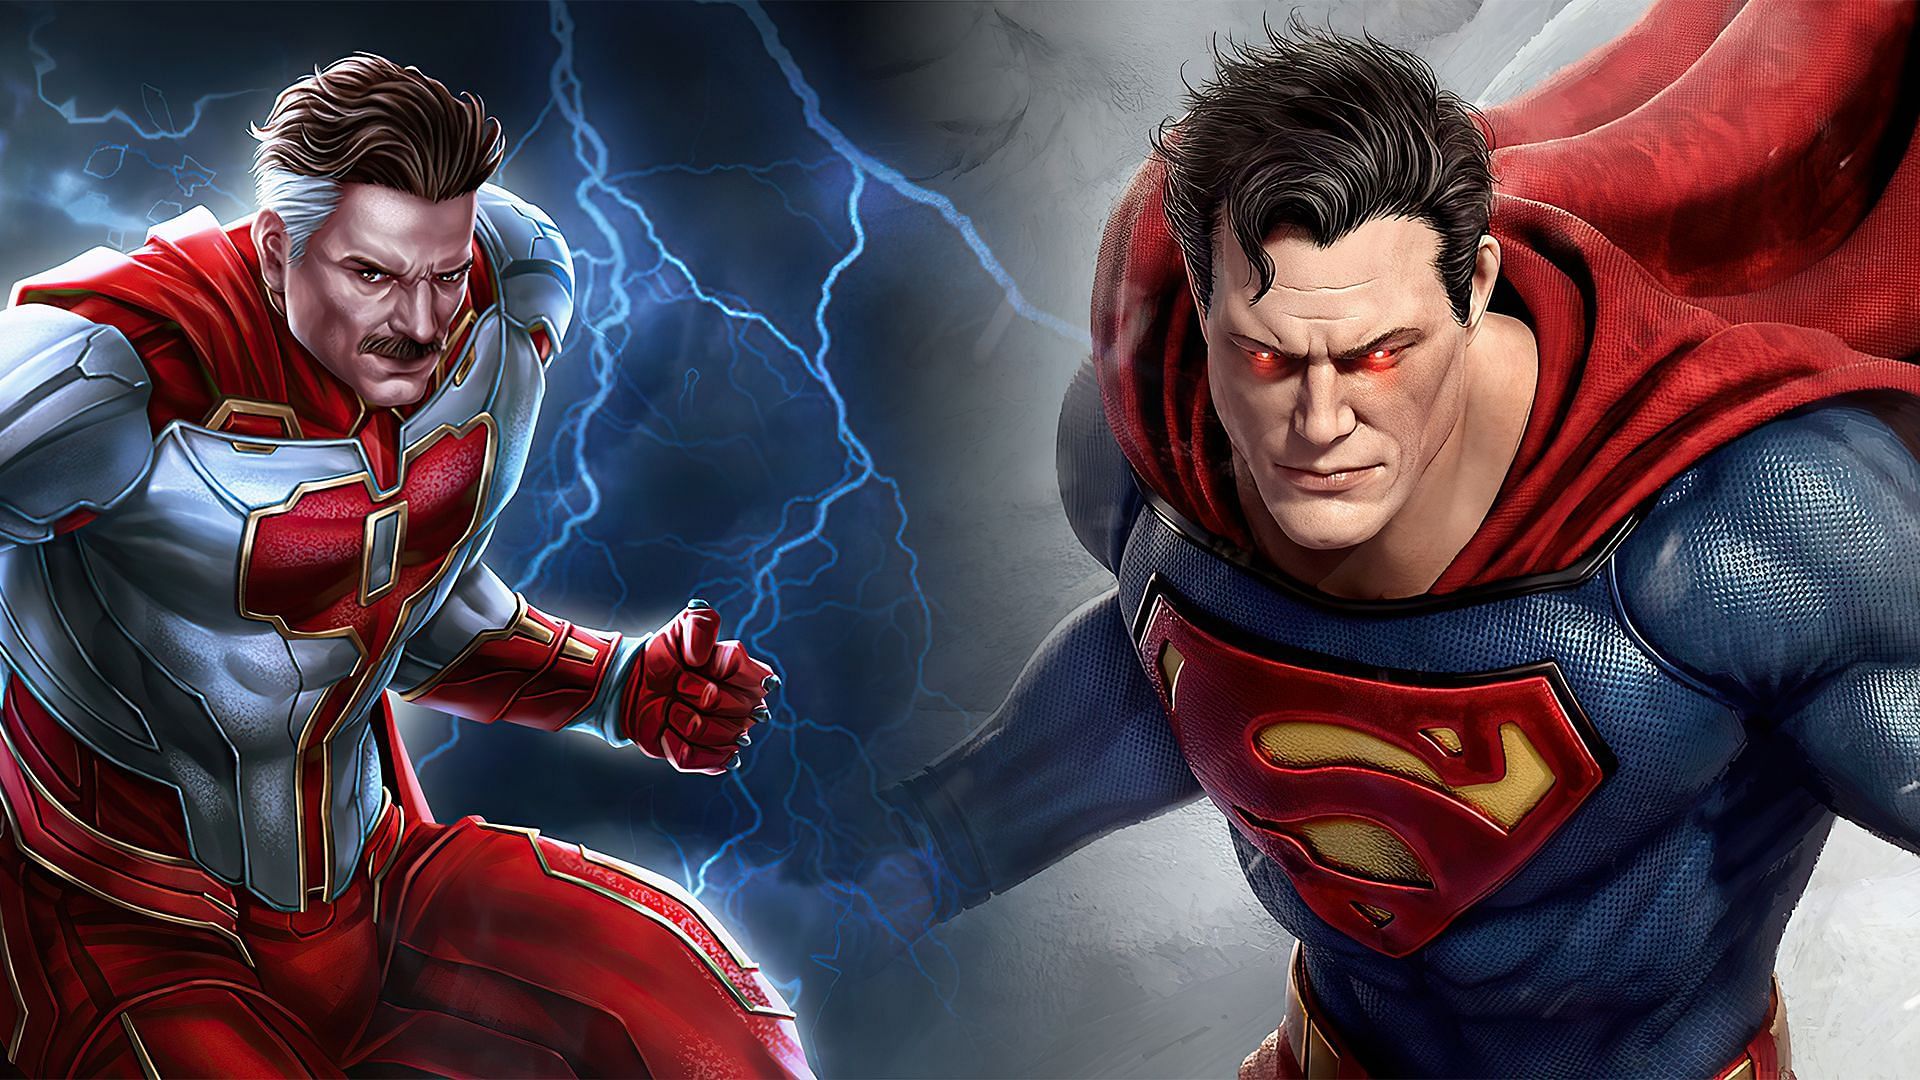 Omni-Man and Superman are both powerful superheroes in their respective comic book universes.(Image Via Sportskeeda)